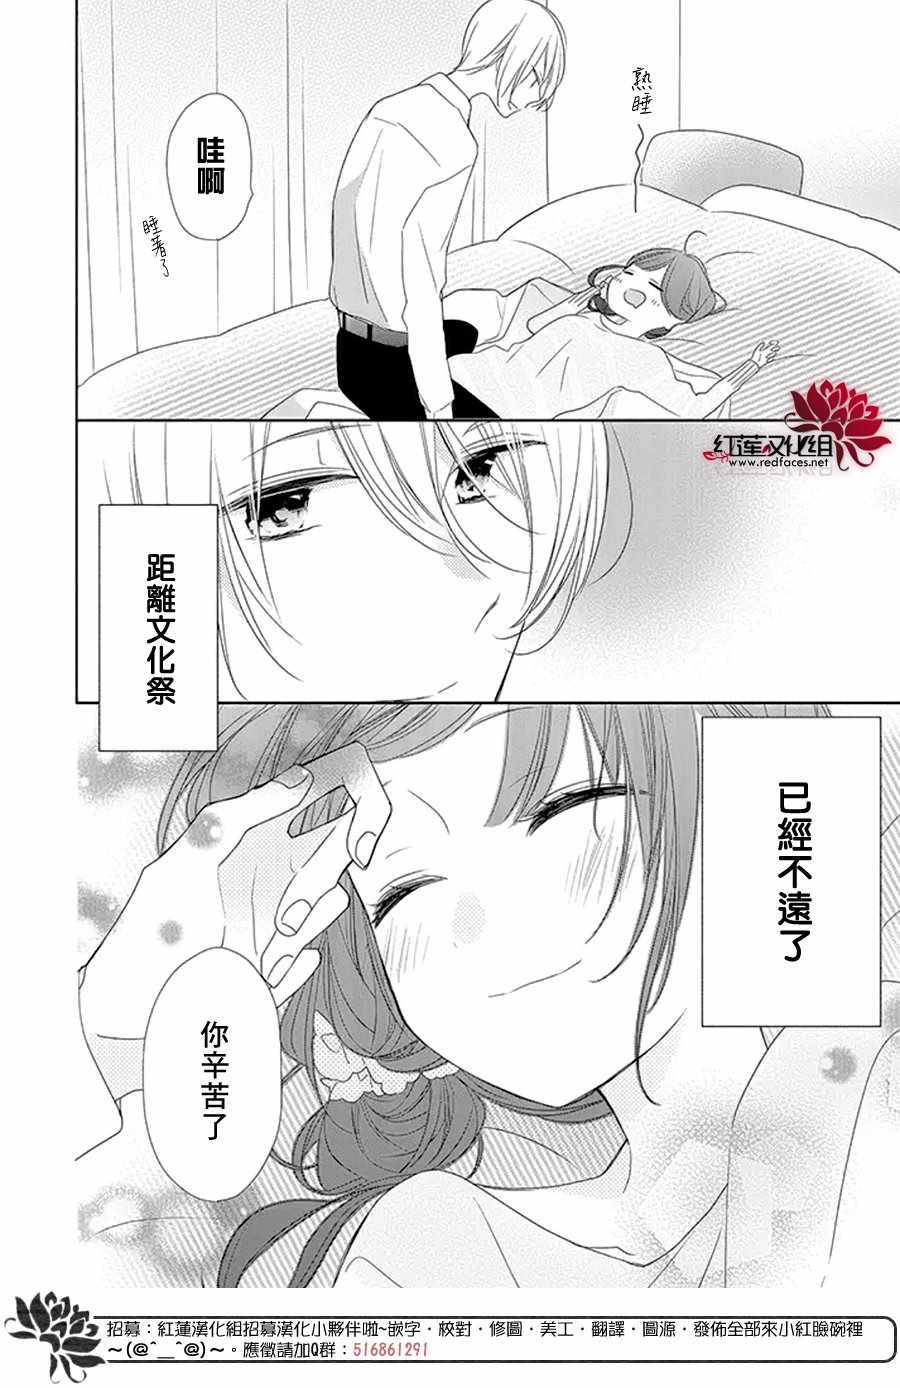 《If given a second chance》漫画 second chance 016话